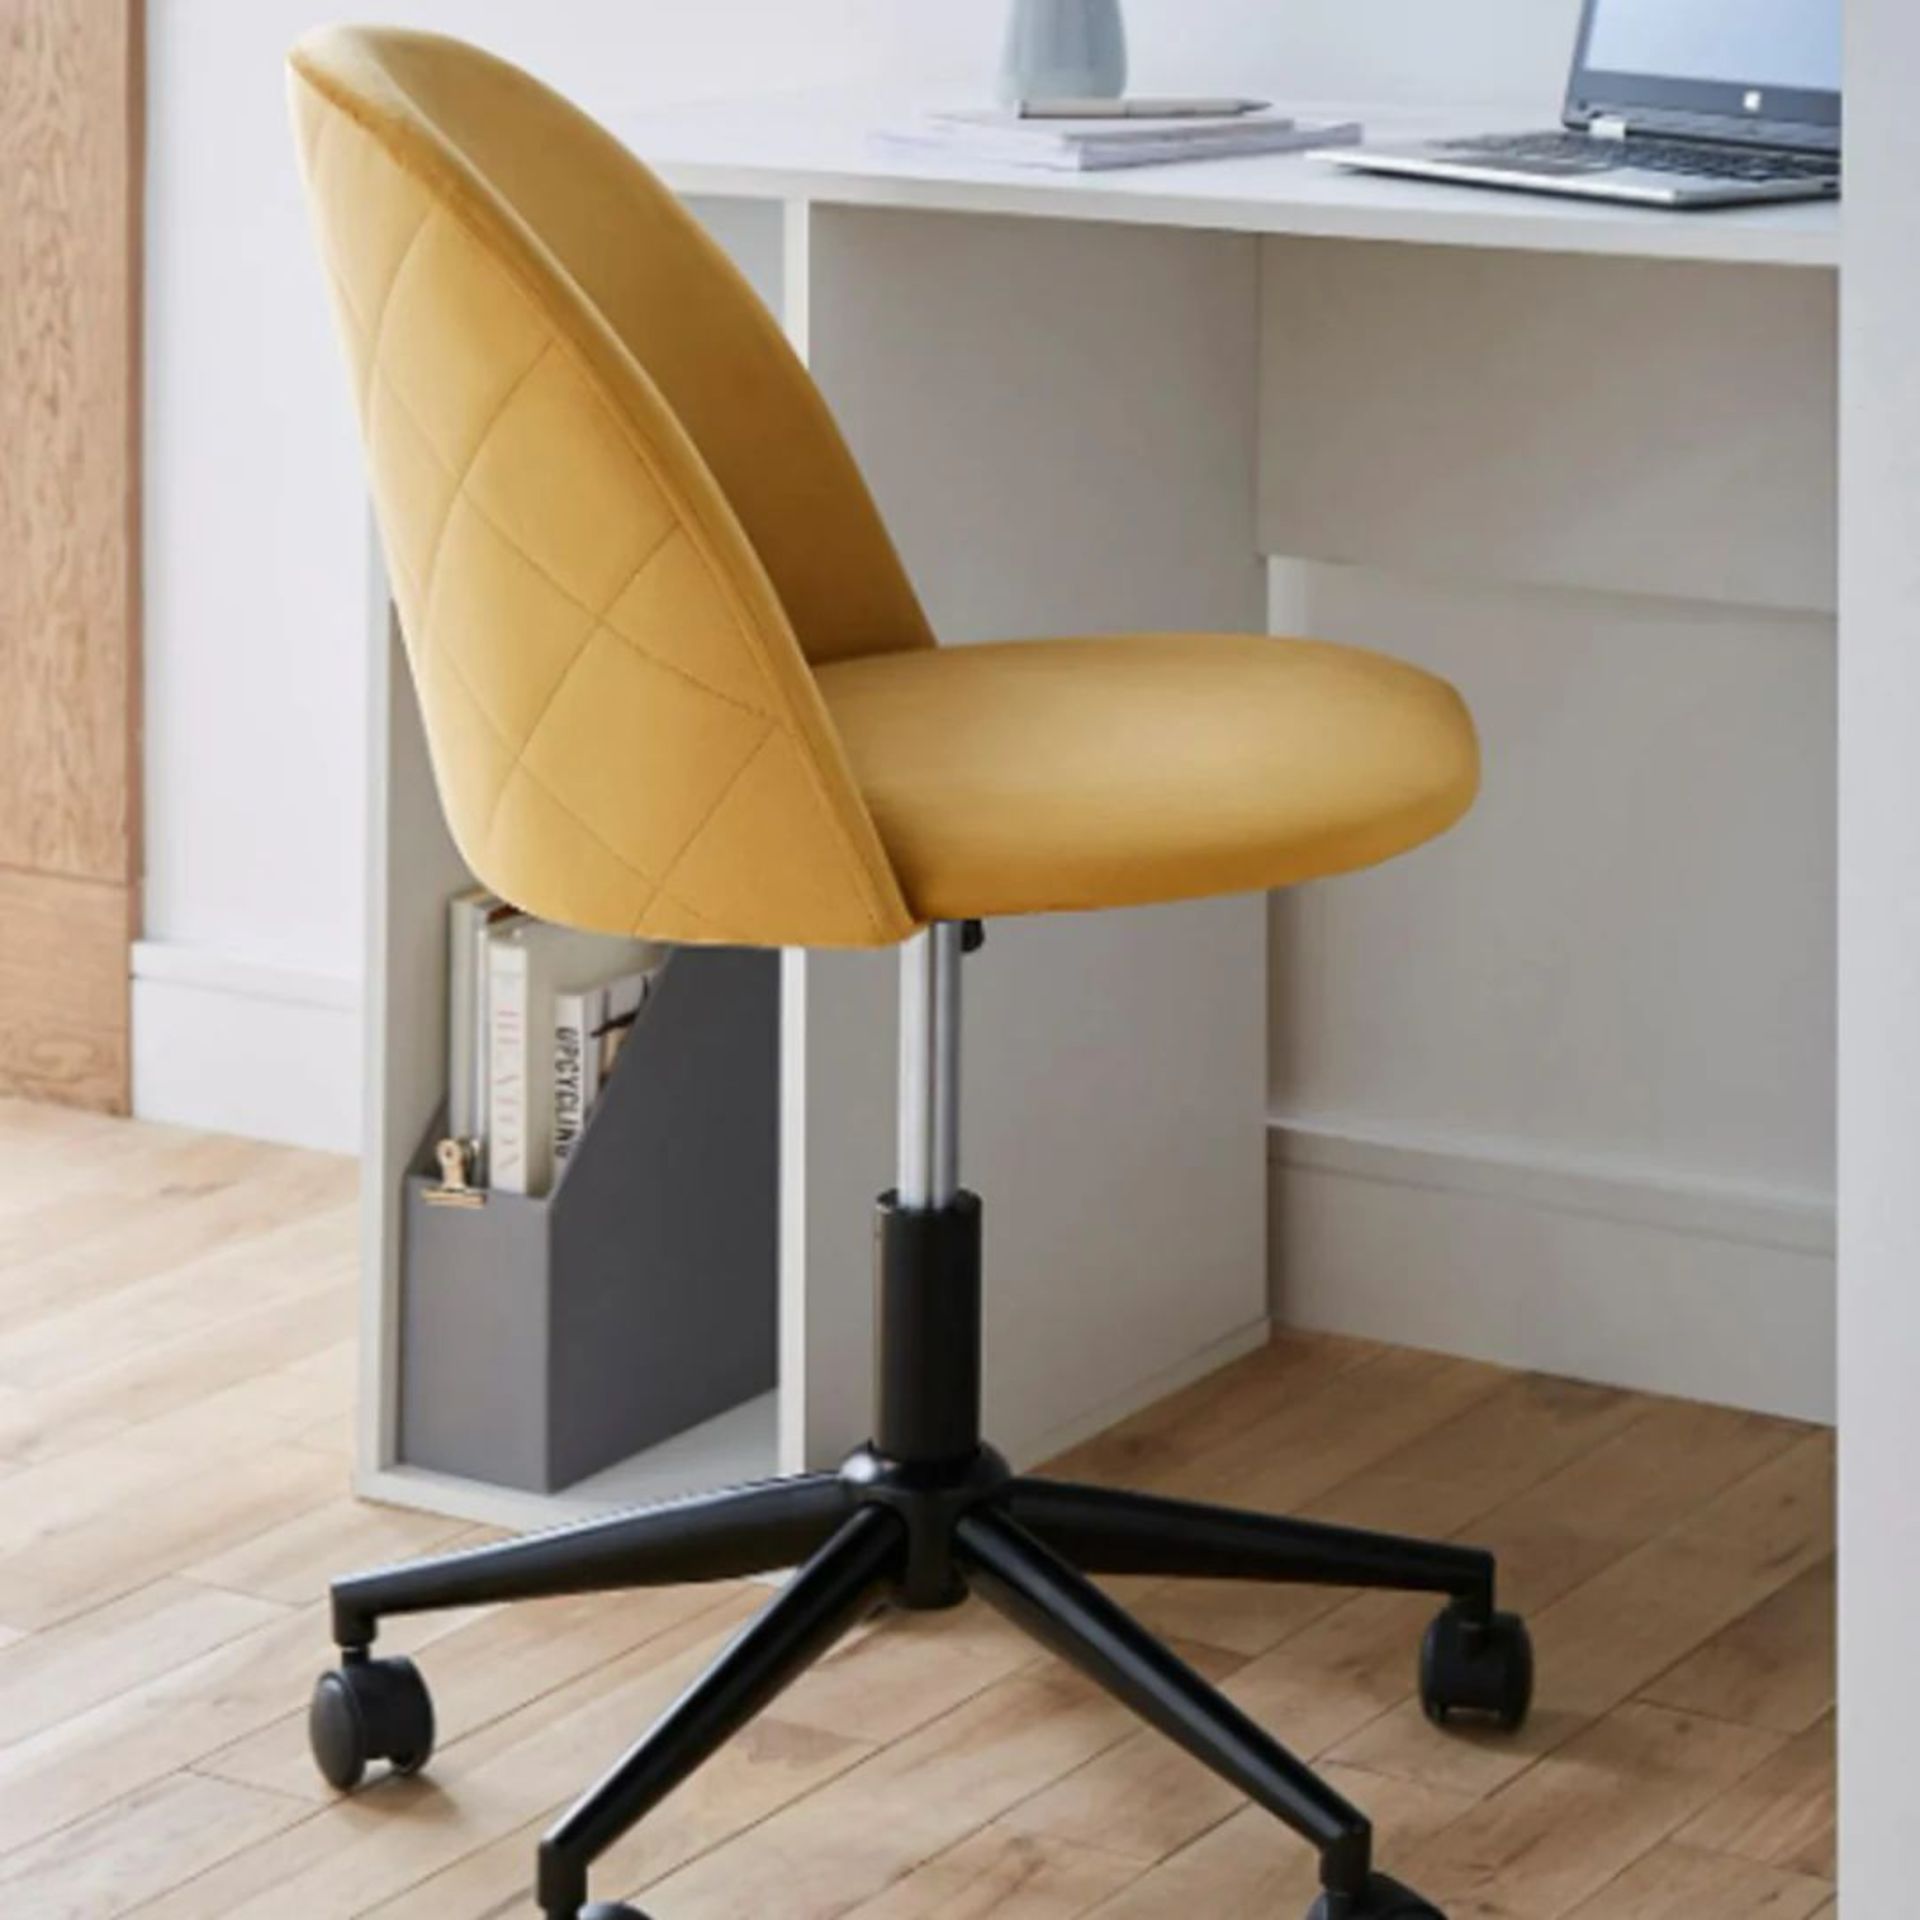 NEW & BOXED KLARA Office Chair - OCHRE. RRP £129. The Klara Office Chair is a luxurious and